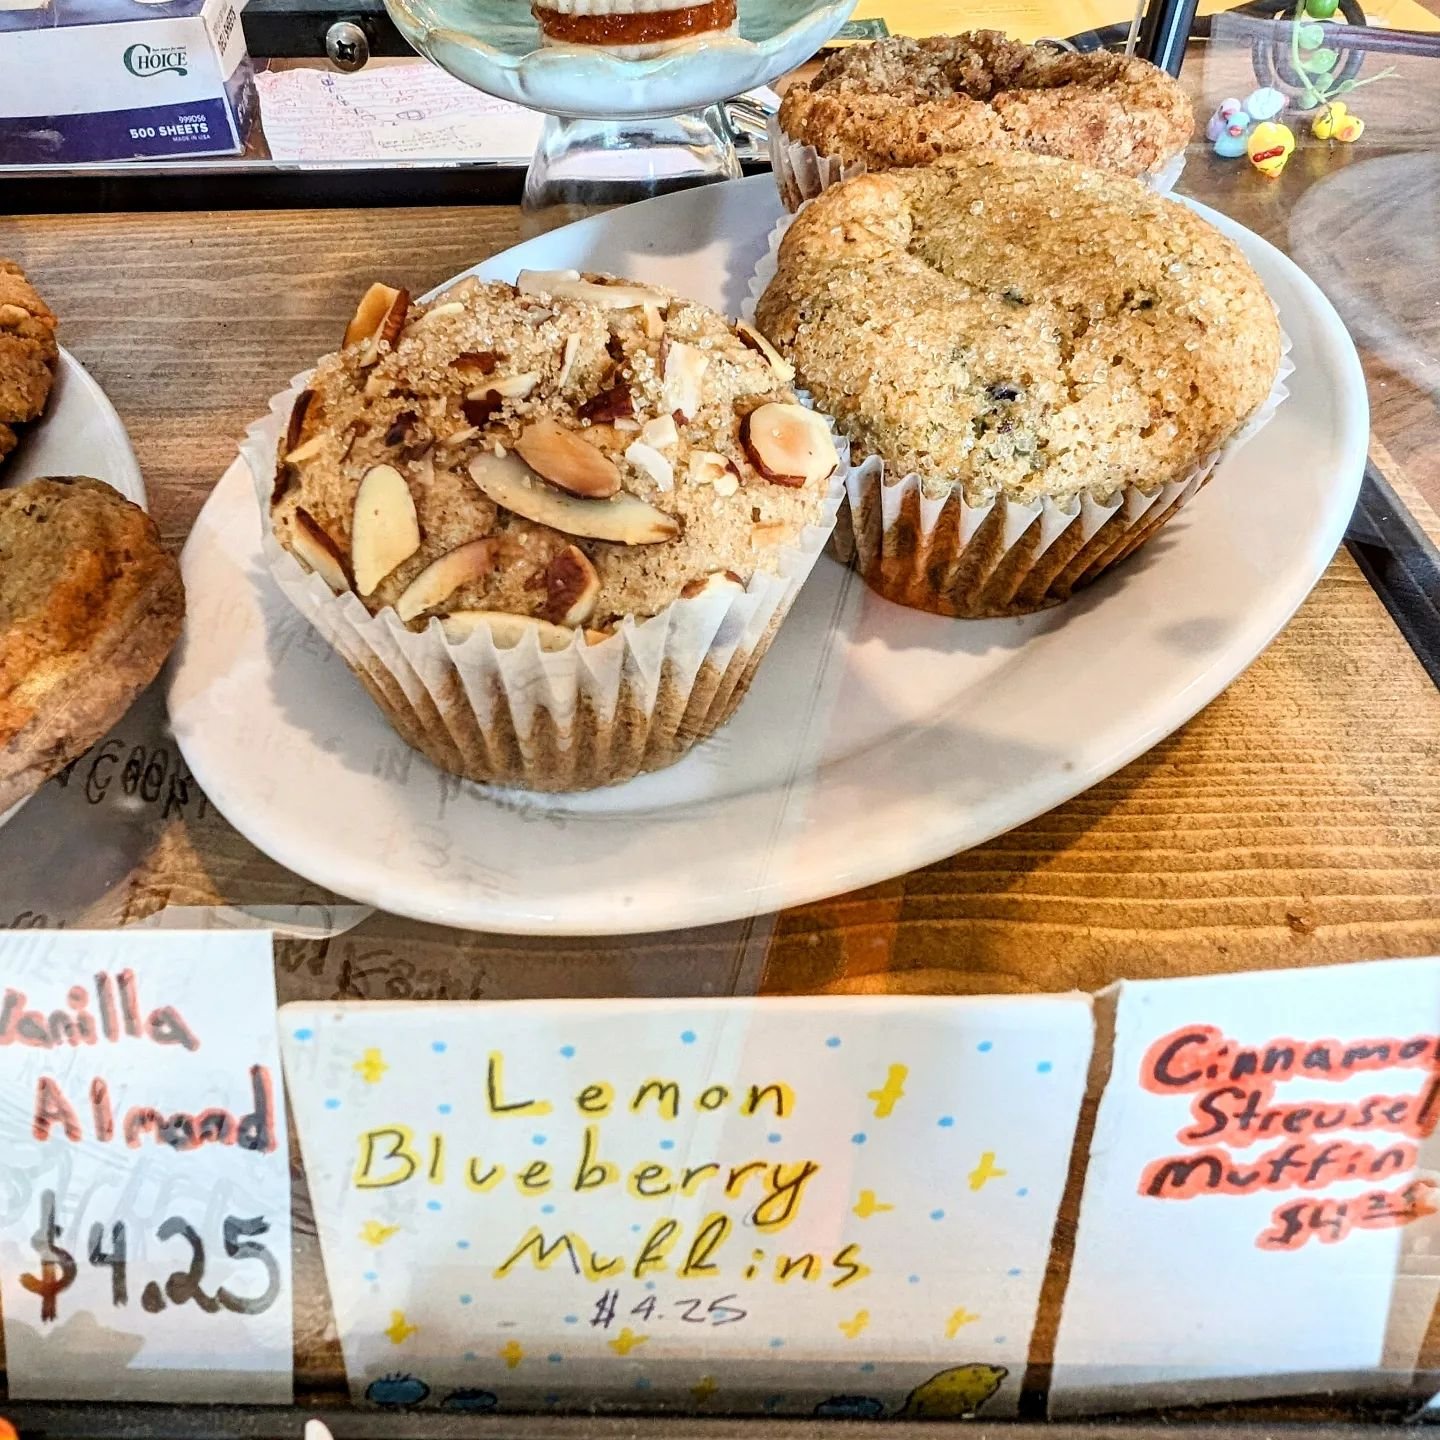 🧁 This Week's Muffins 🧁
🌰 Vanilla Almond
🫐 Blueberry Lemon 🍋 
🧁 Cinnamon Streusel 
Baked with love by The Living Room 🌈 💕 
@LivingRoomSTL

.
.
.
#TowerGrove #TowerGroveSouth #TowerGroveHeights #SouthGrand #SouthGrandSTL #TowerGroveEast #Compt